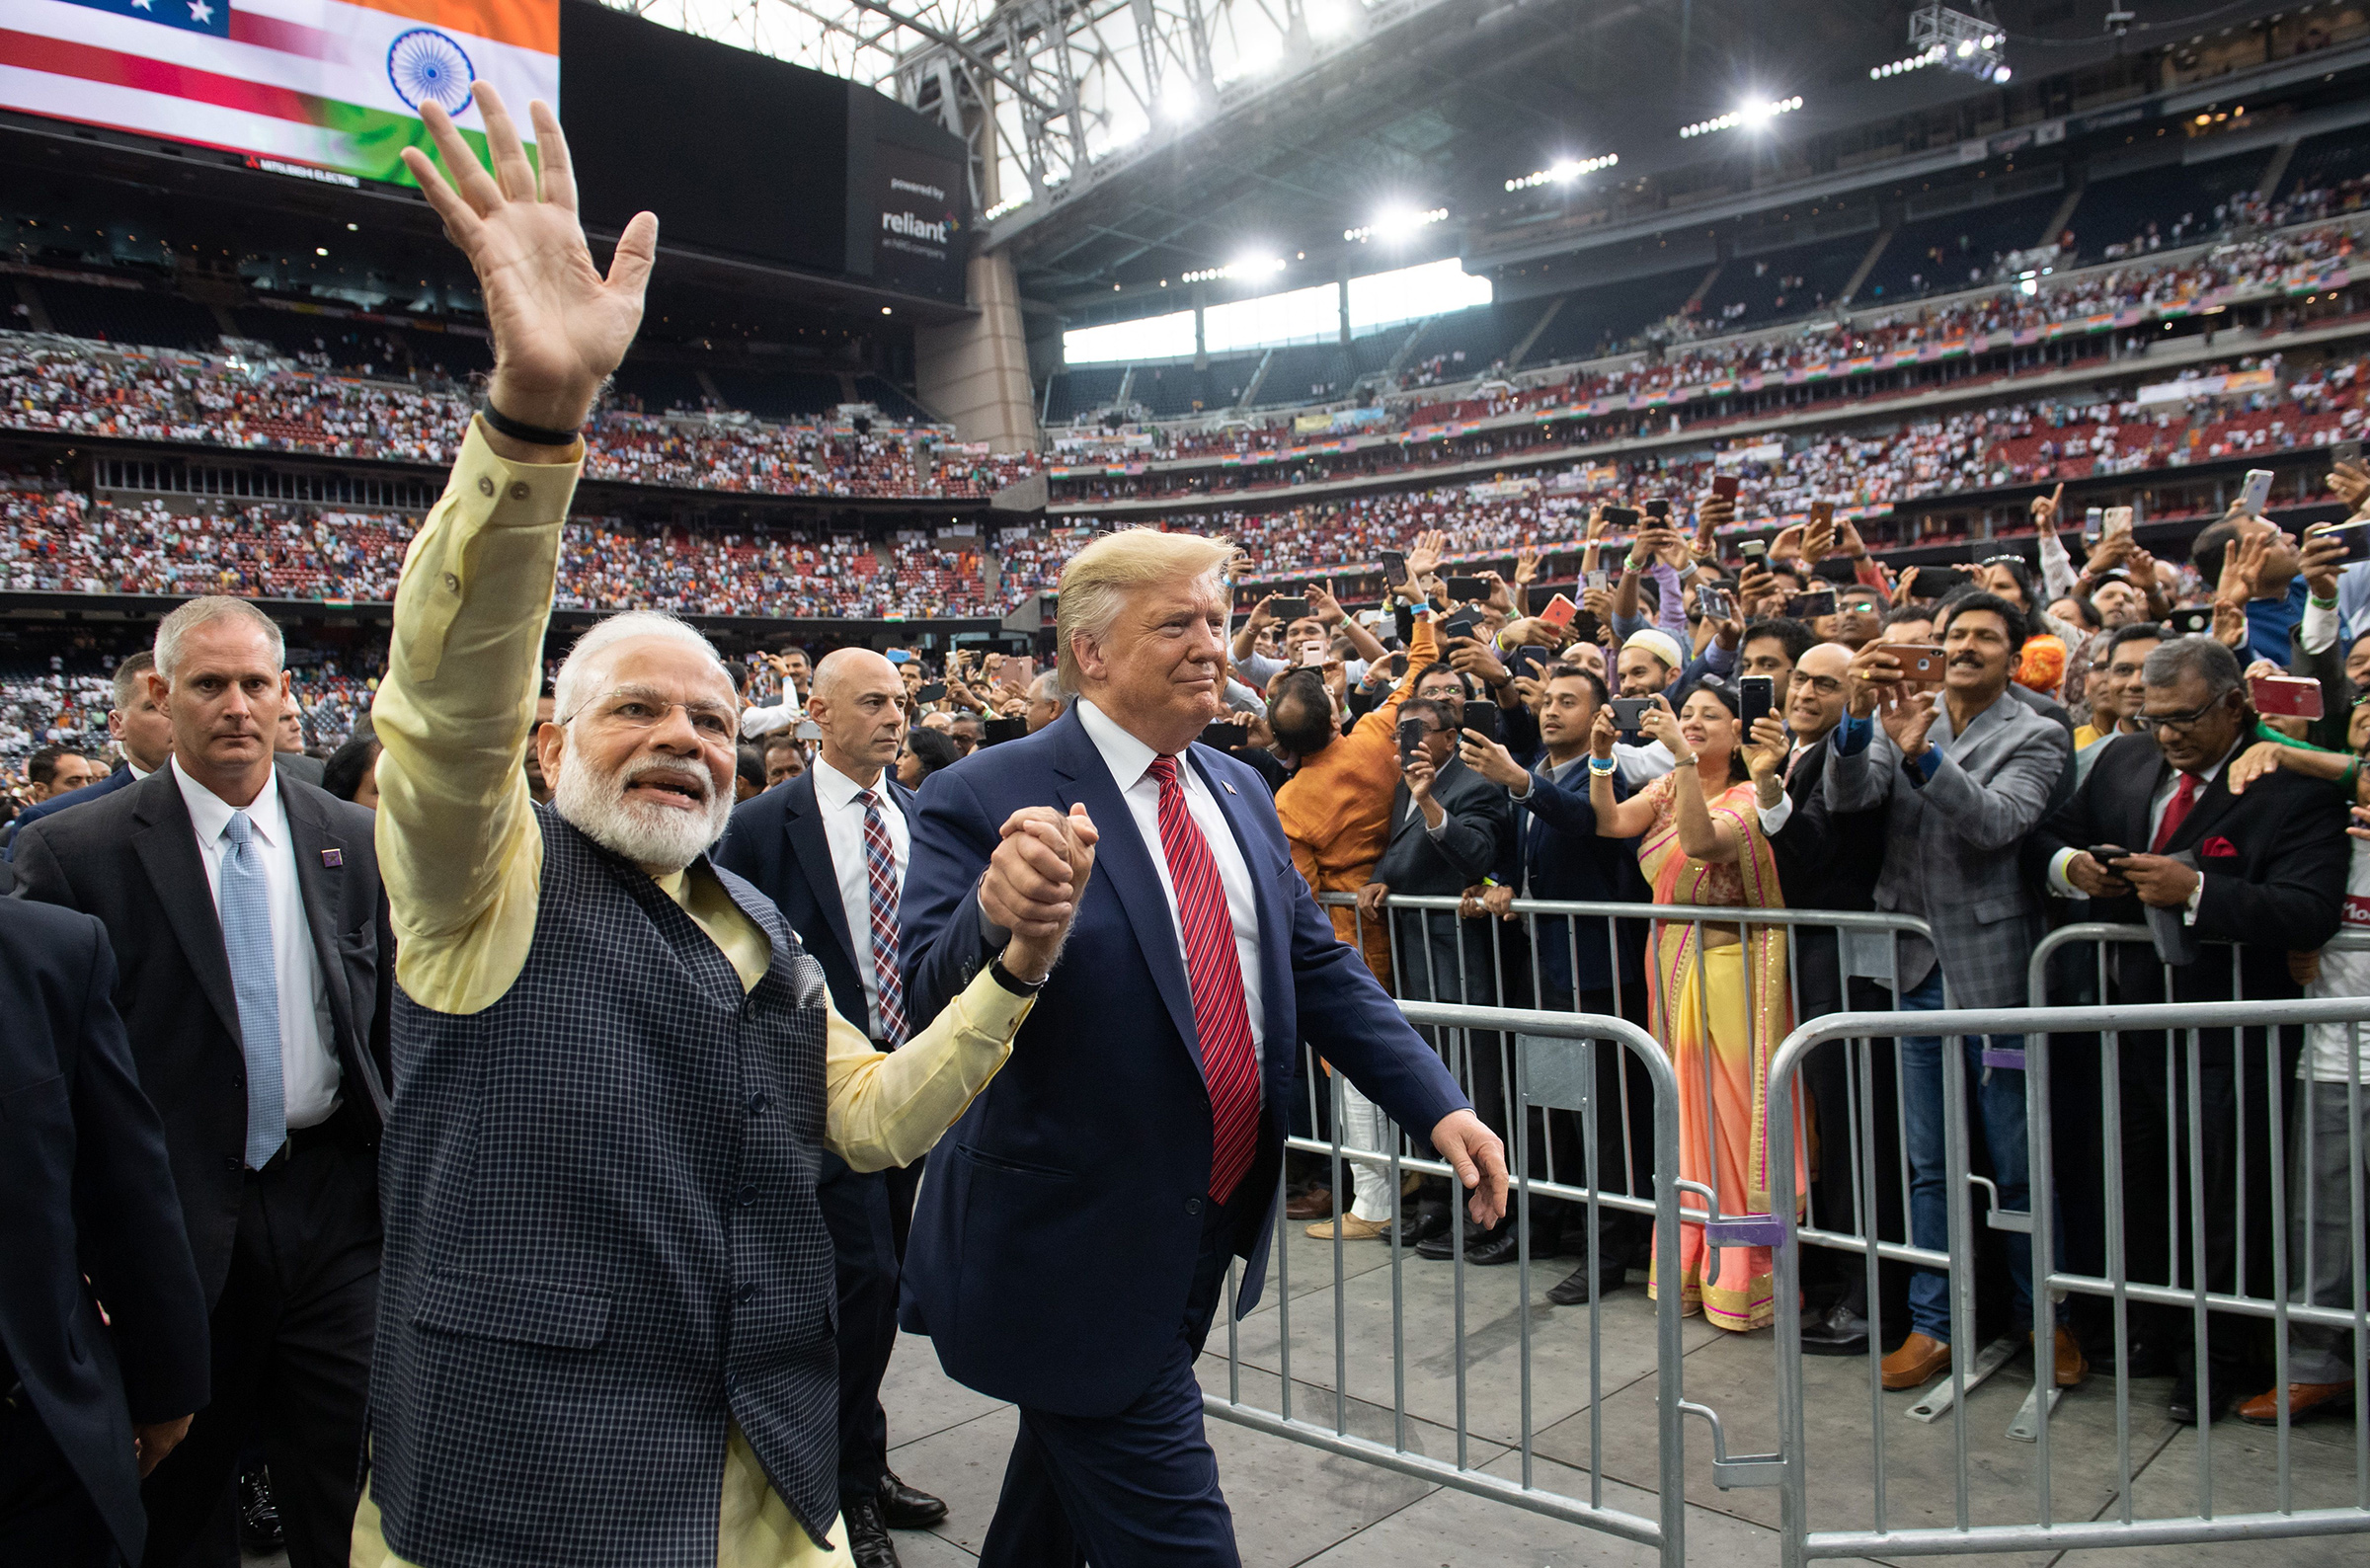 Trump and Modi attend "Howdy, Modi!" at NRG Stadium in Houston Sept. 22, 2019. Tens of thousands of Indian-Americans converged for an unusual joint rally, a symbol of the bond between the two leaders